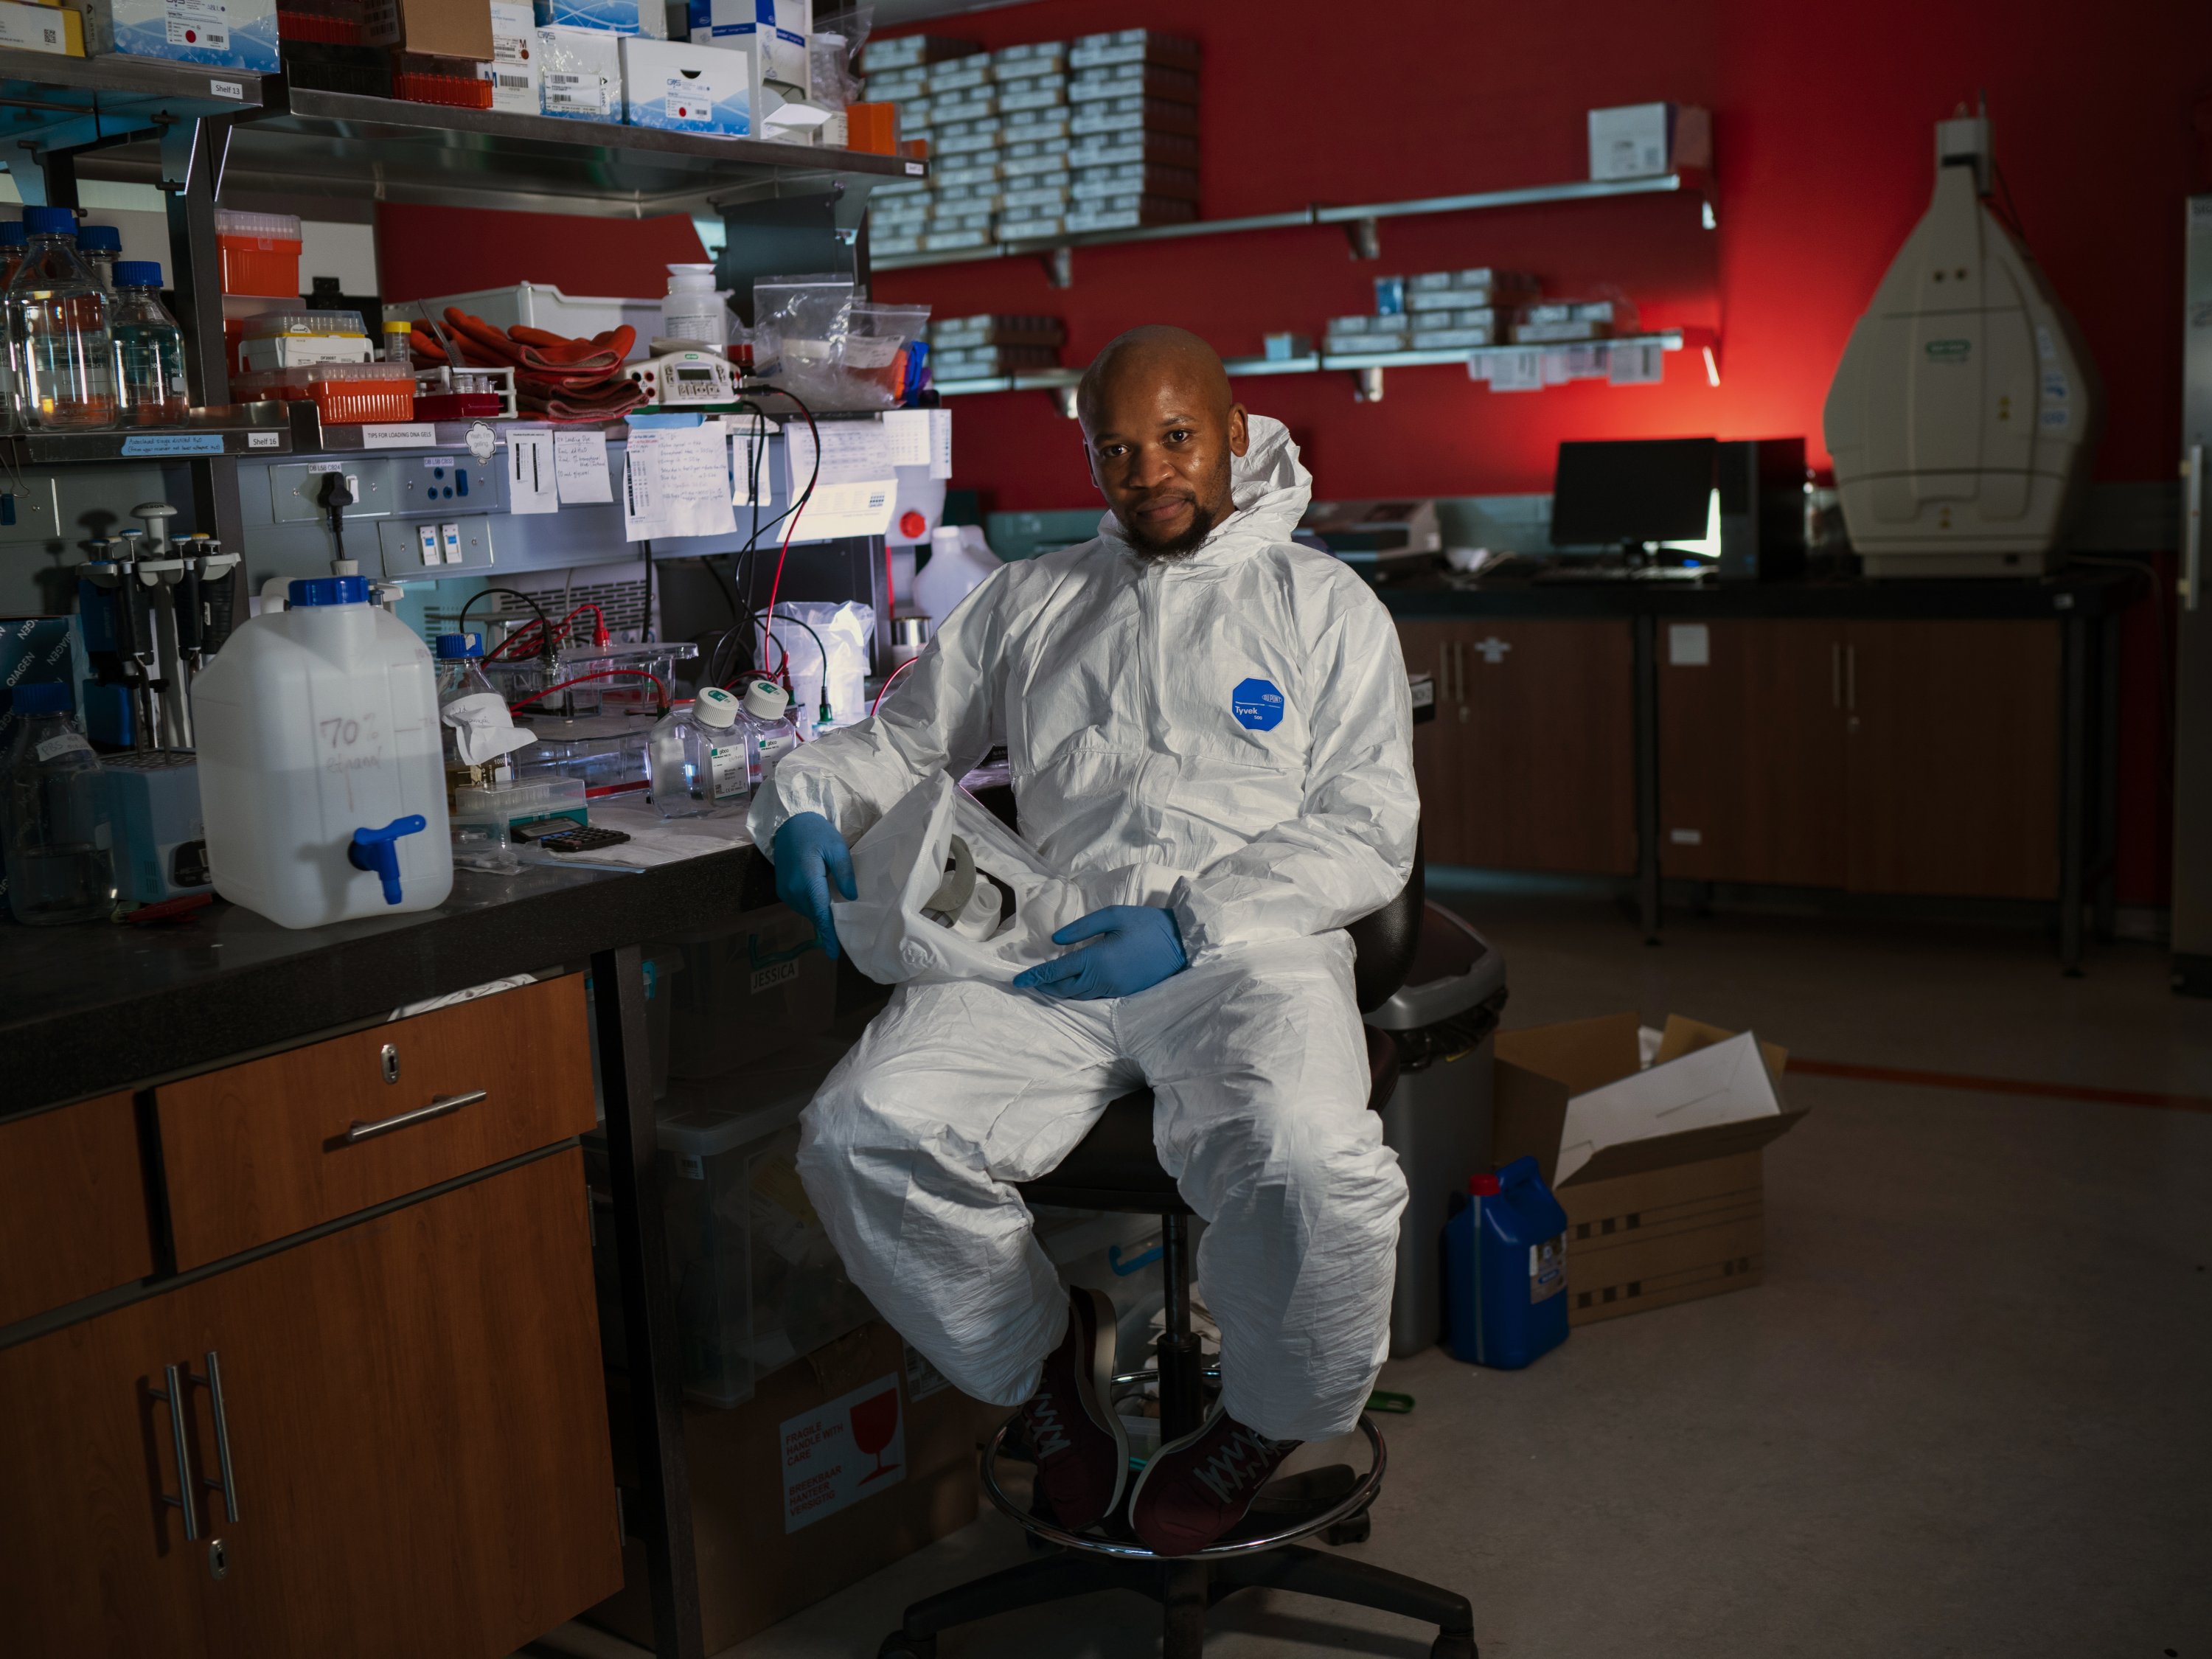 Sandile Cele – a doctoral candidate at the University of Kwazulu-Natal who figured out how to grow the South African variant of the coronavirus in the laboratory, which enabled them to test it and discover that people previously infected with COVID-19 don't produce antibodies against the mutant version – poses in a lab in Durban, South Africa, March 4, 2021. (AP Photo)